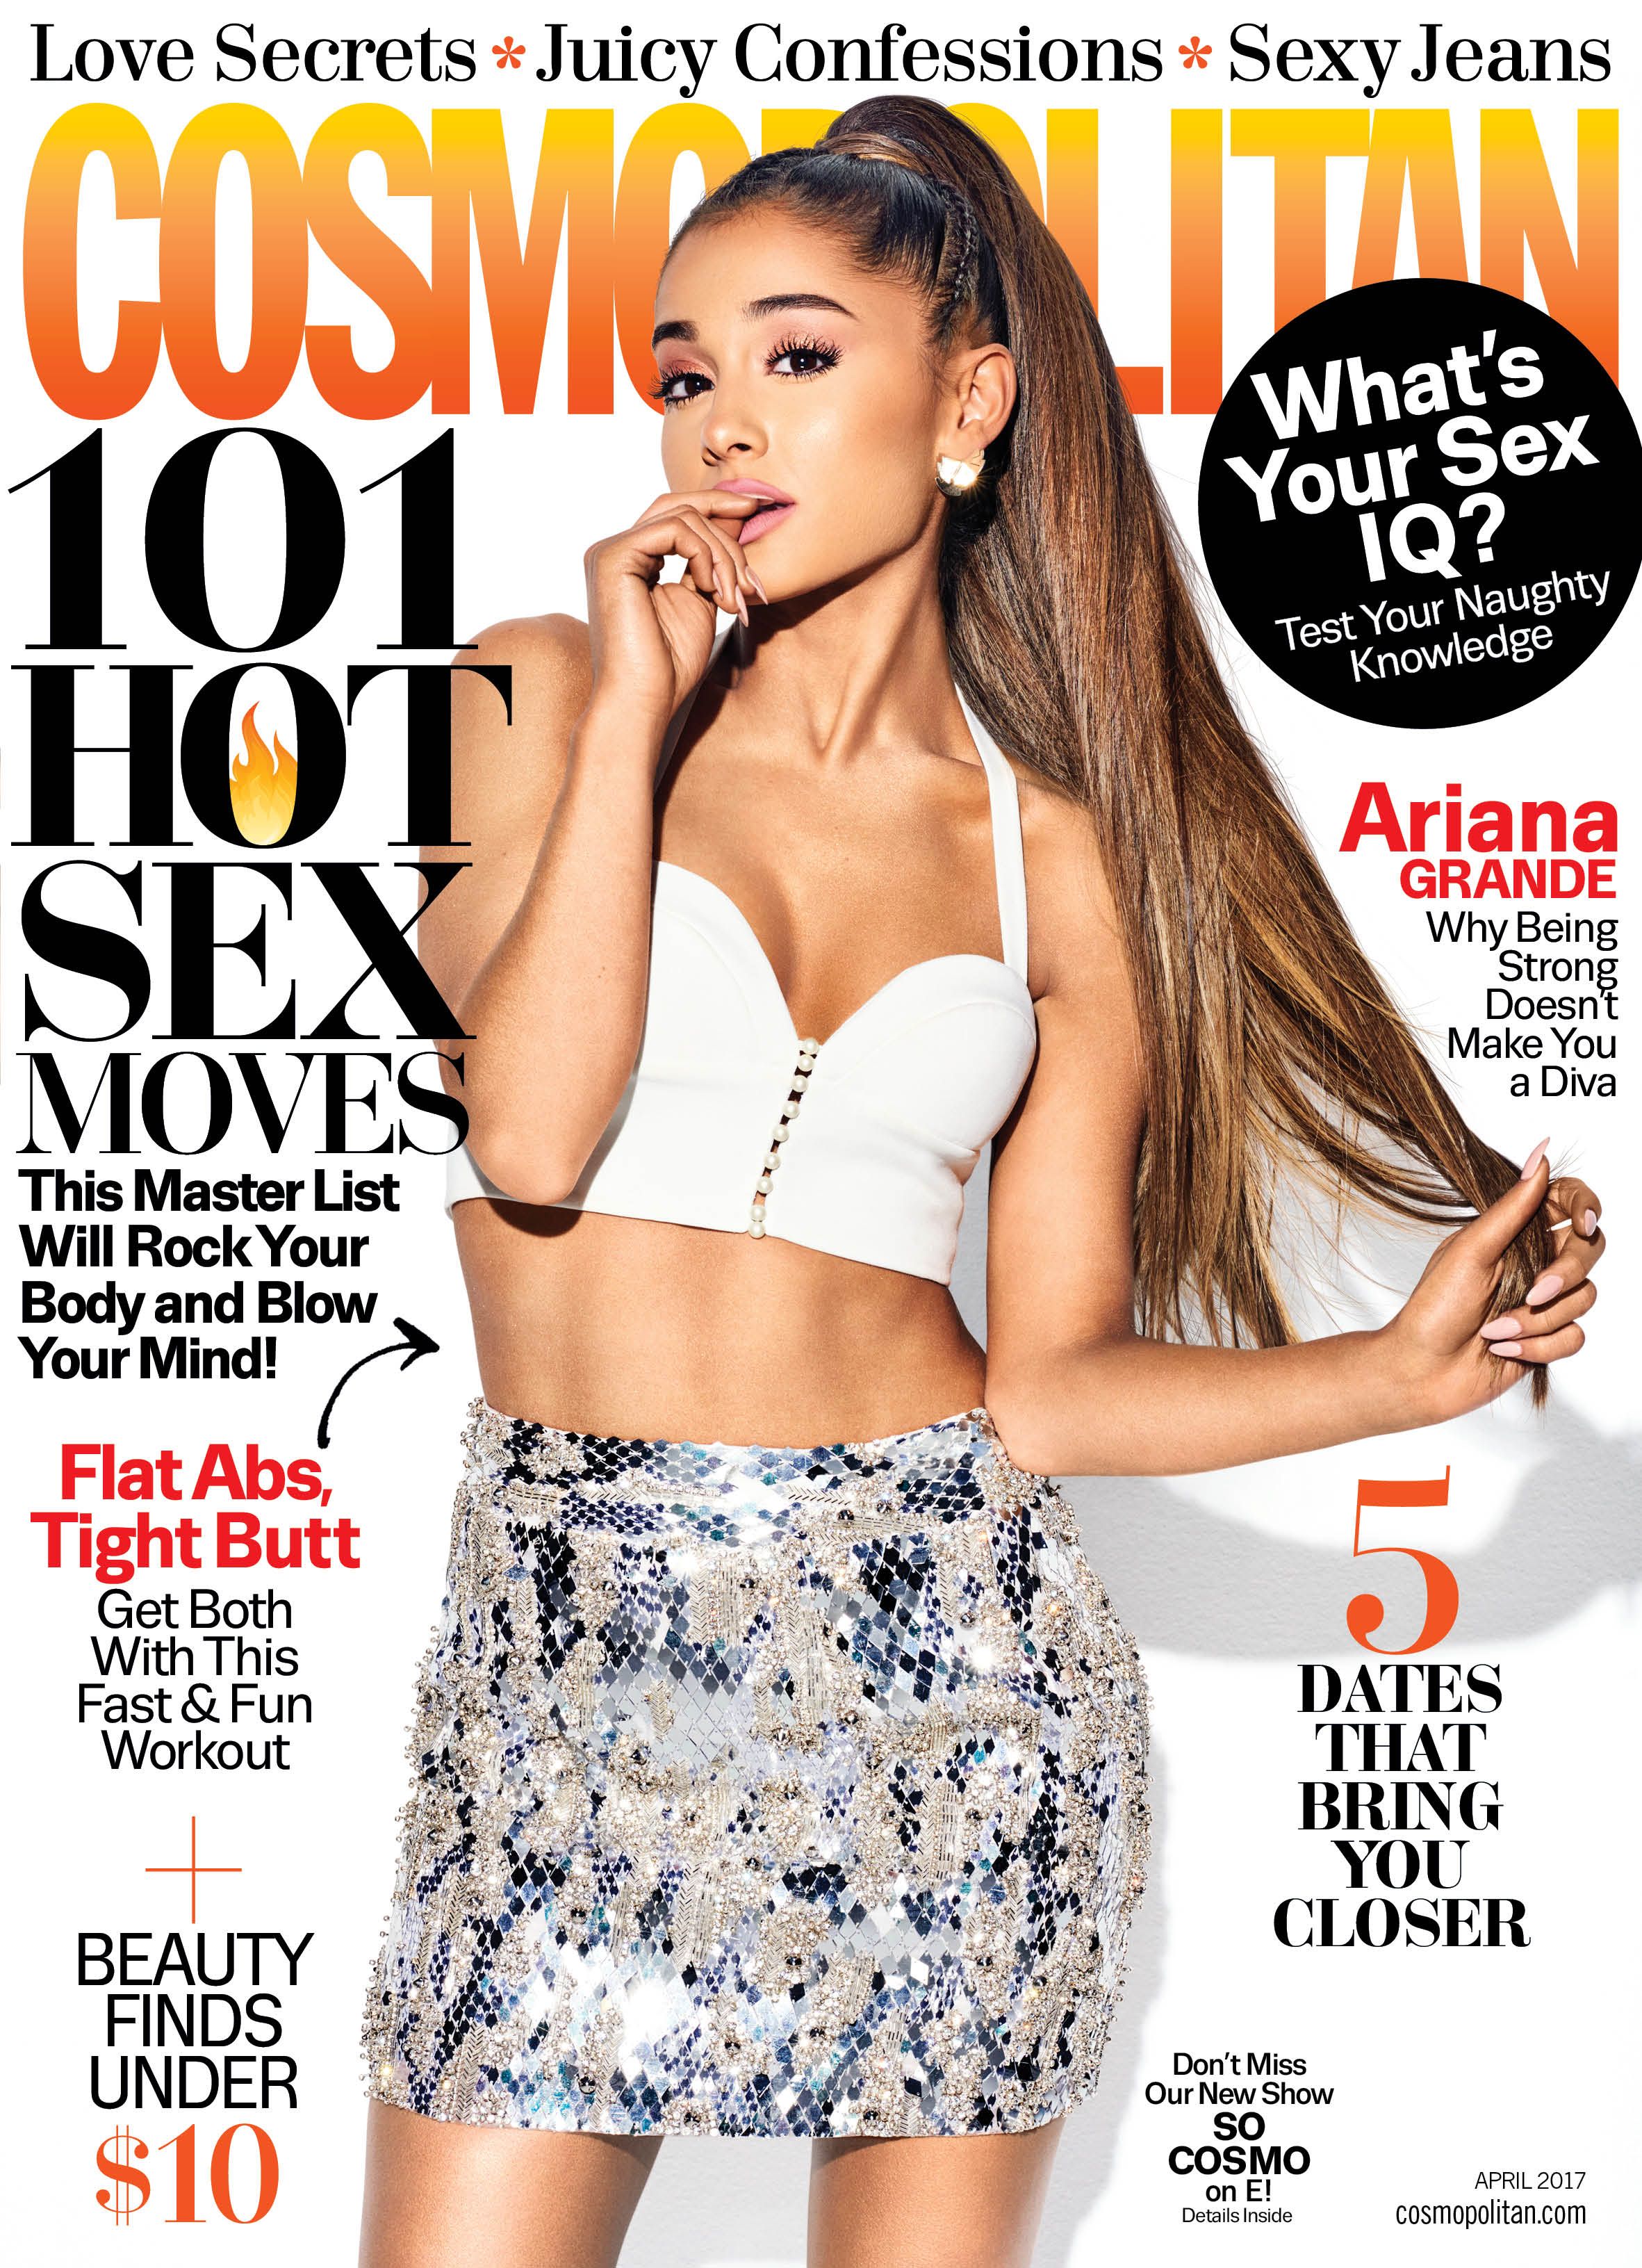 aaron liong recommends ariana grande no butt pic